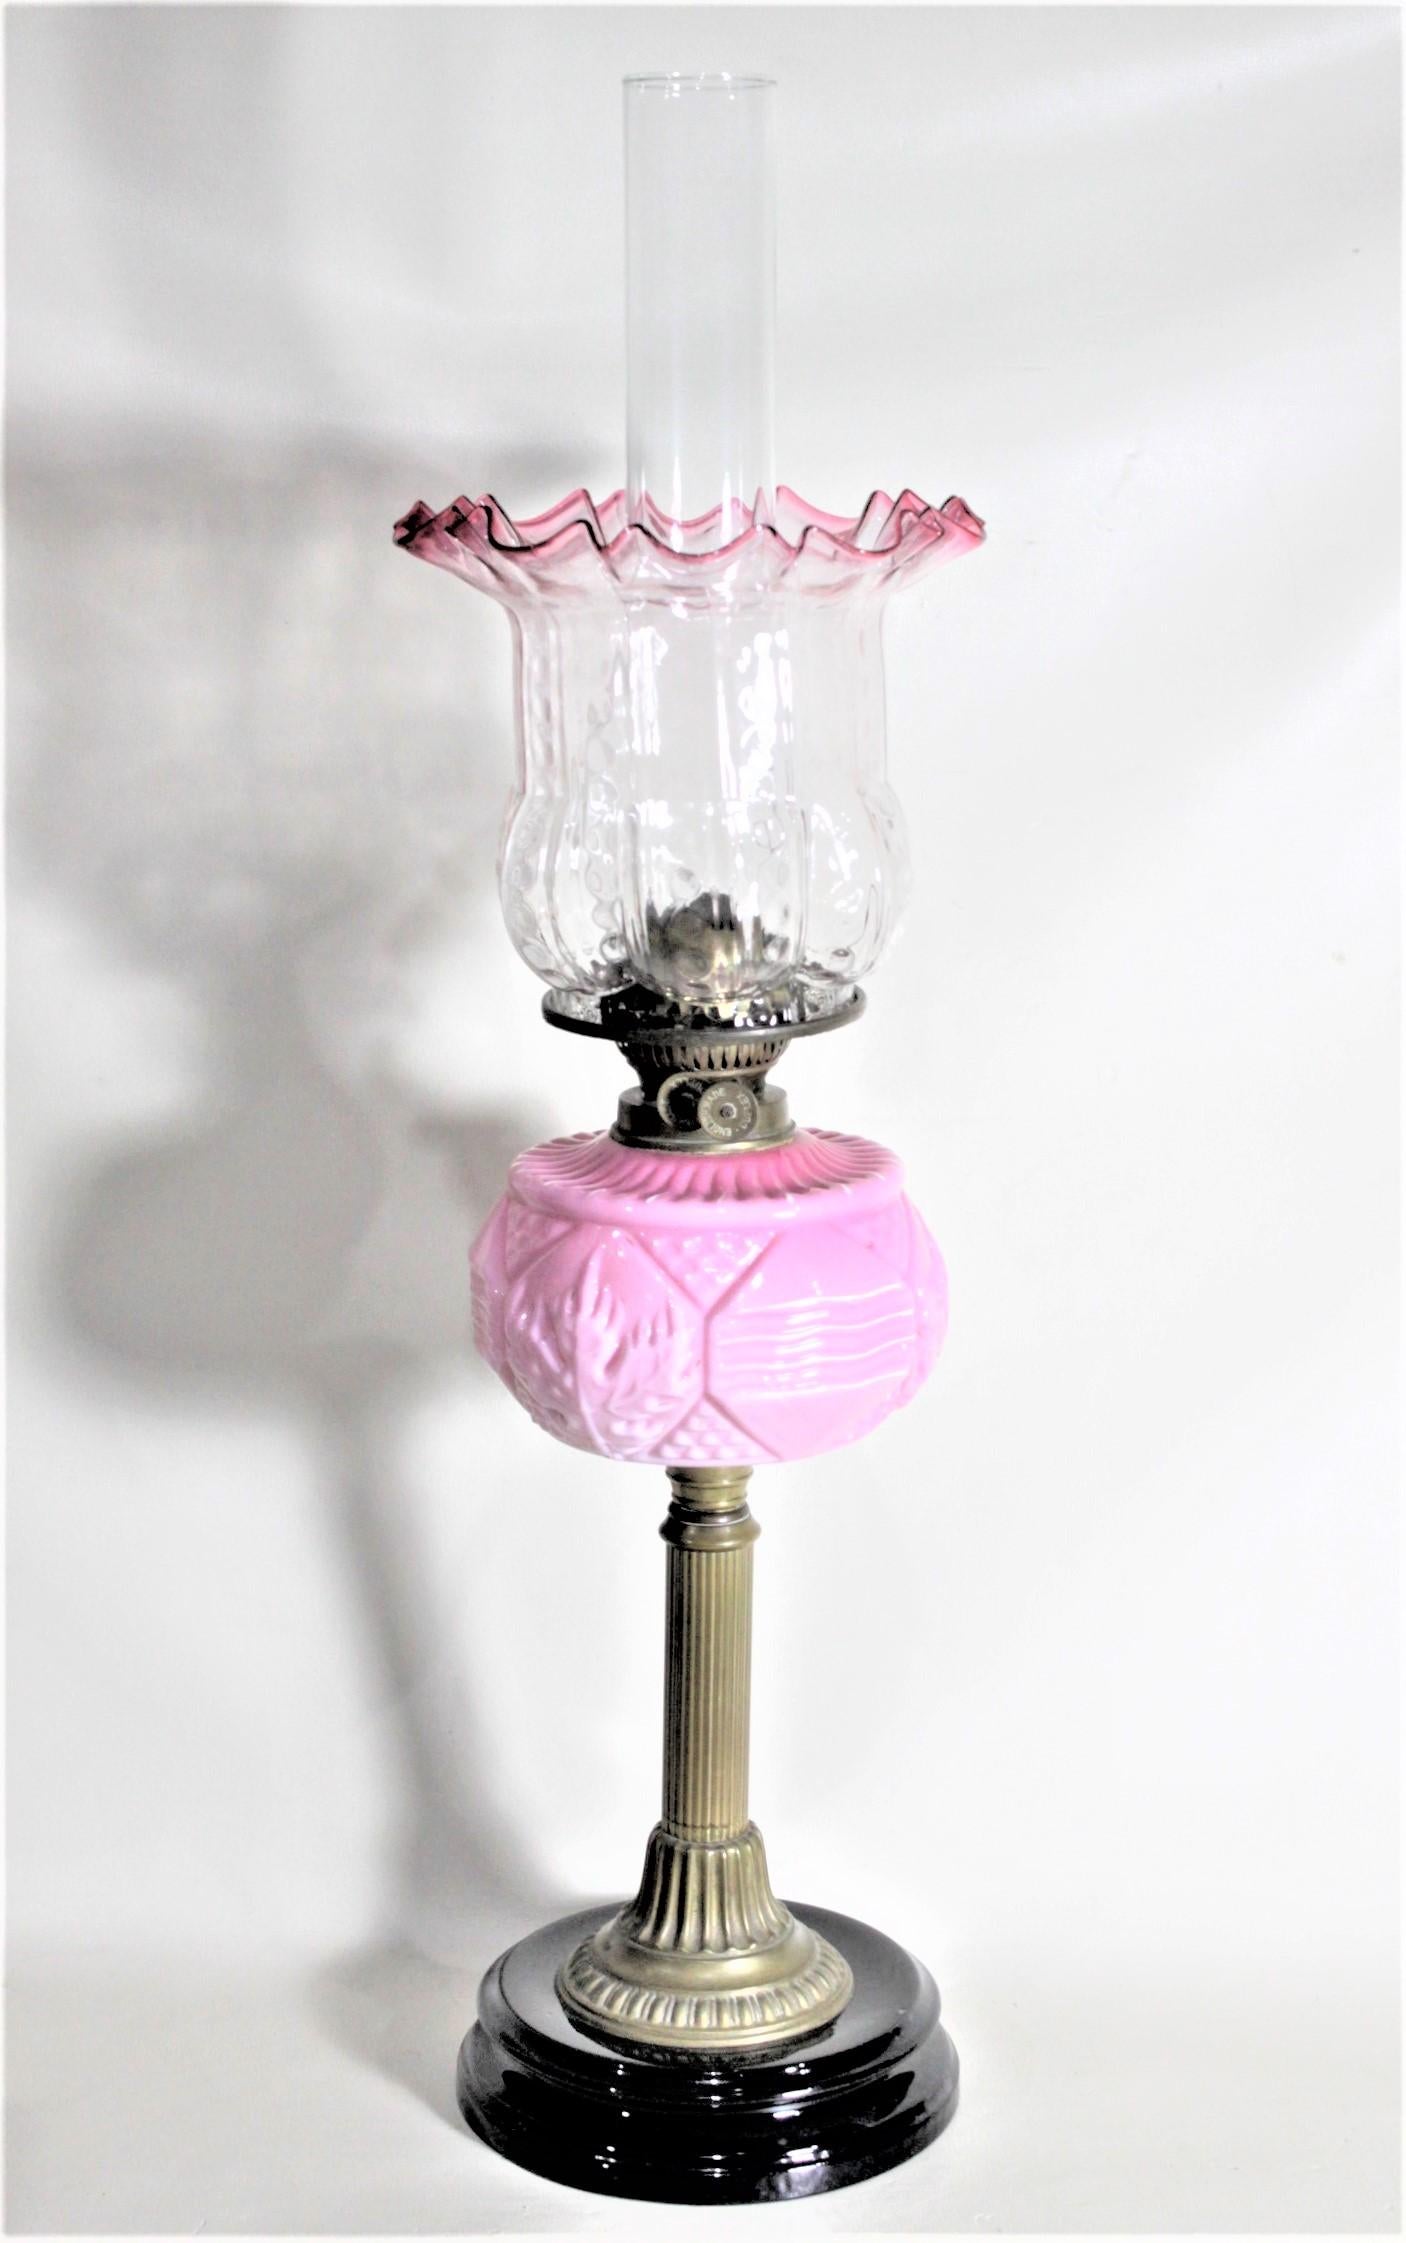 Hand-Crafted Antique English Double Burner Parlor Oil Lamp with Cranberry Art Glass Accents